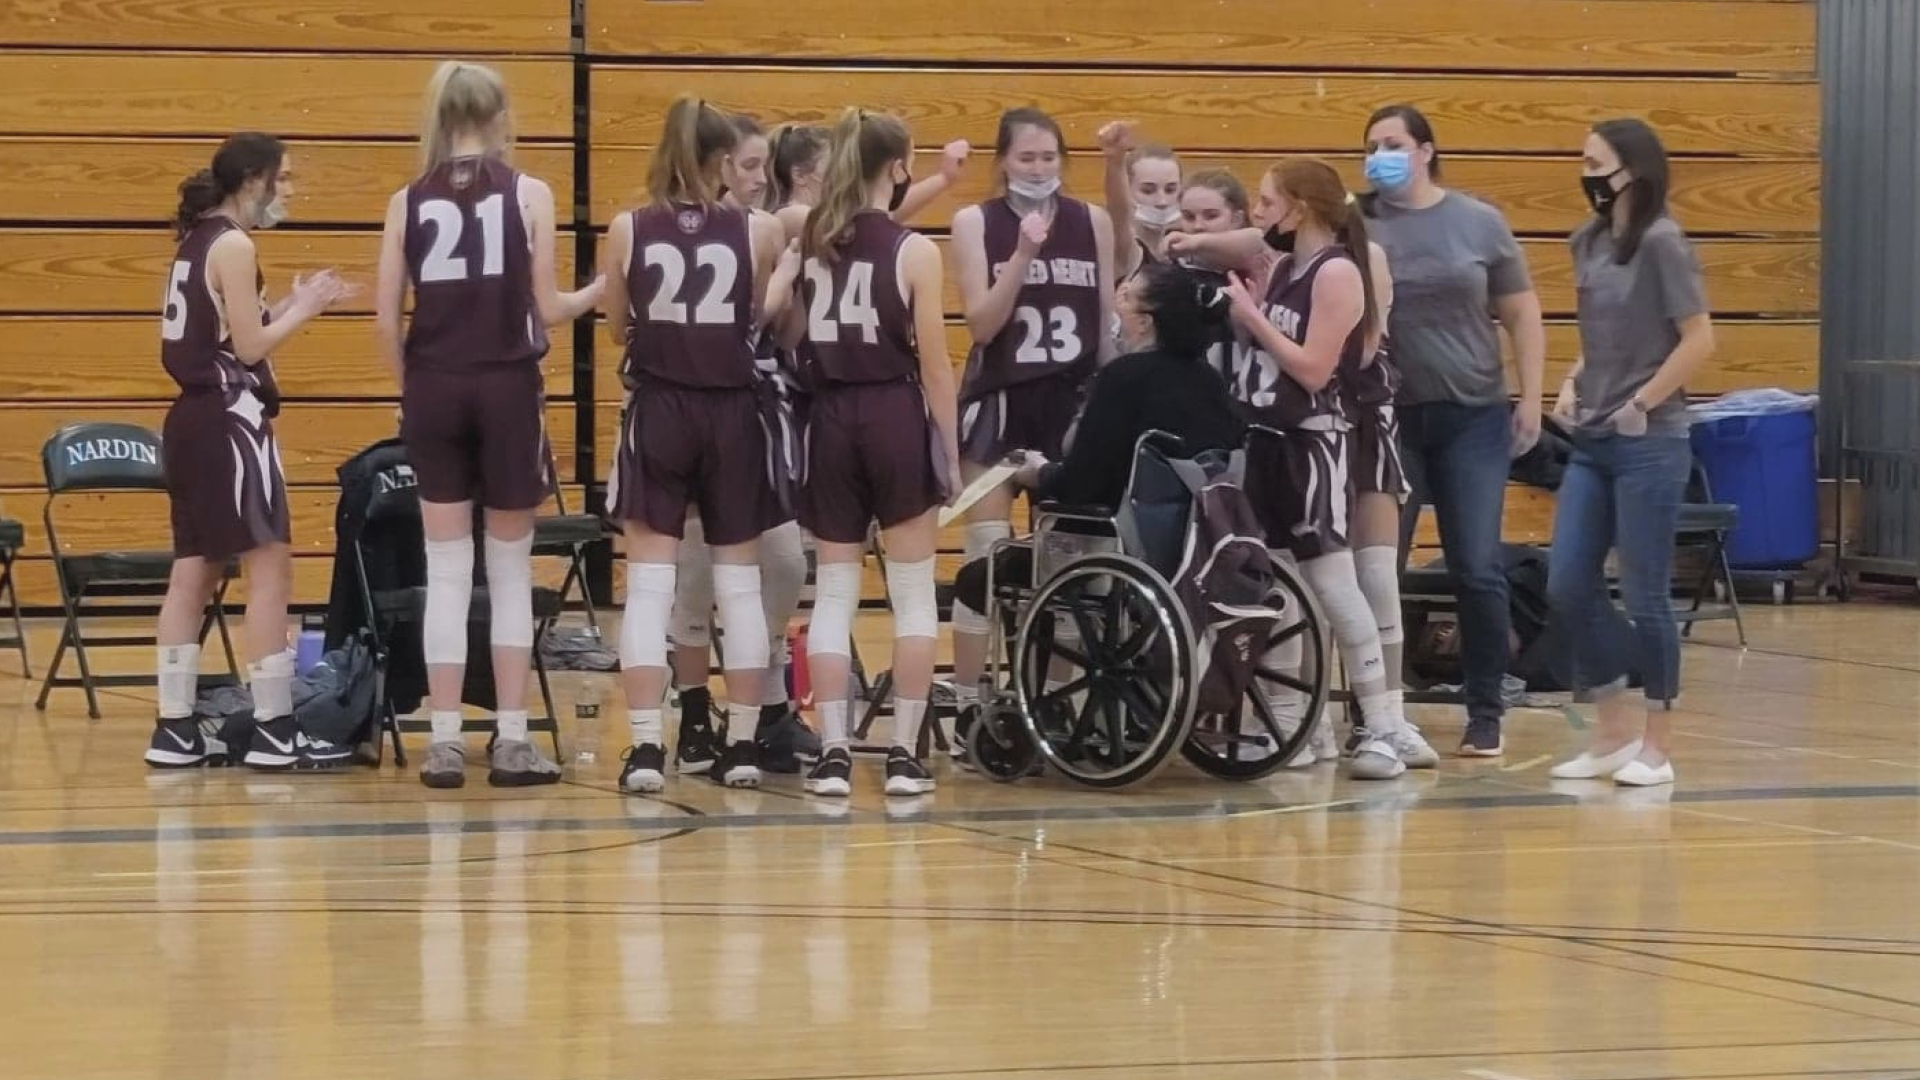 Sacred Heart Academy's varsity basketball coach returned to court for the very first time since an accident that nearly claimed her life four months ago.